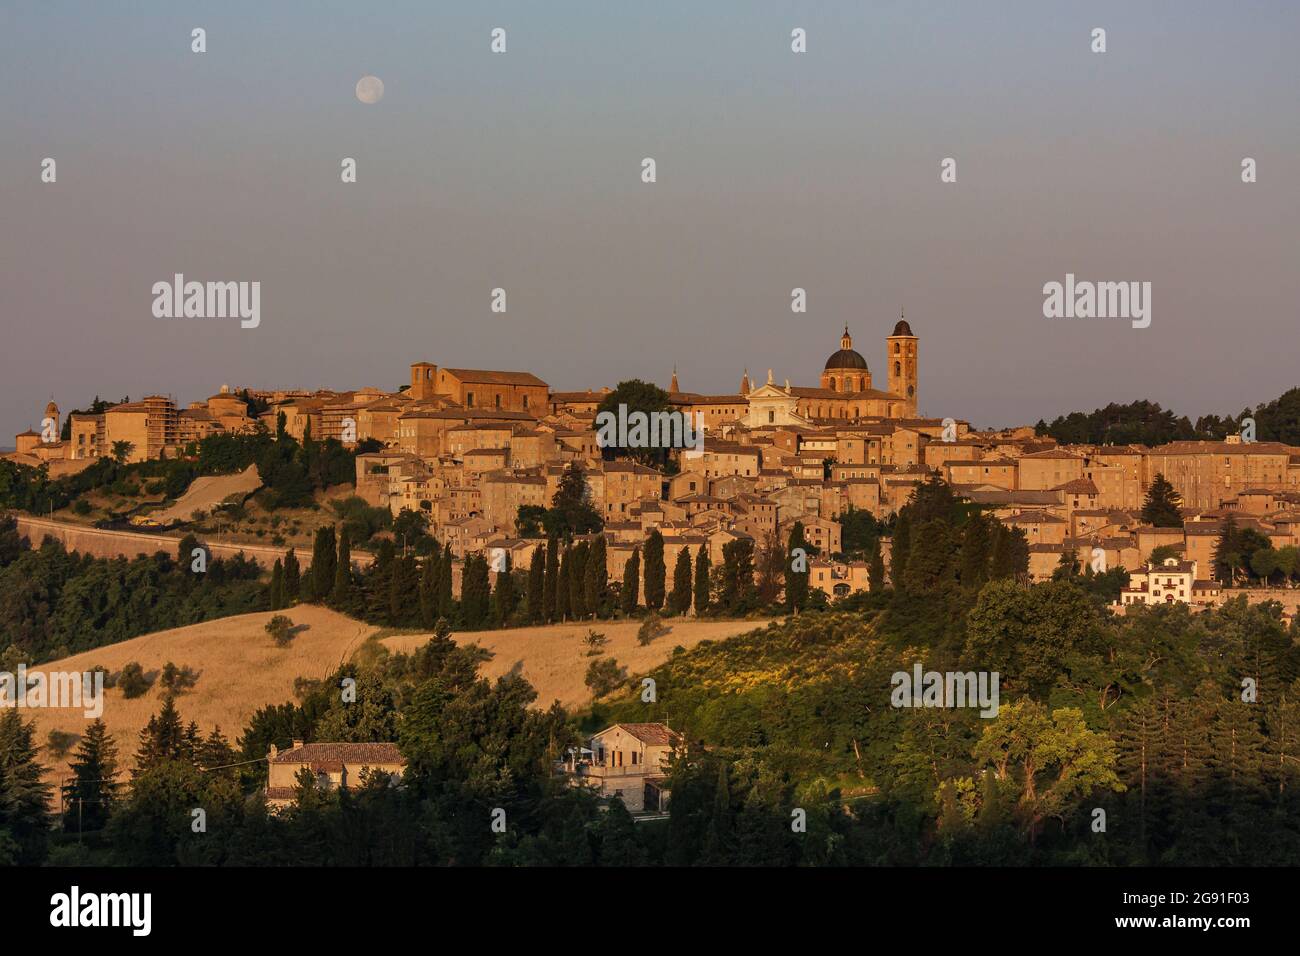 Urbino is a walled city in the center of Italy, a World Heritage Site notable for a remarkable historical legacy of independent Renaissance culture, e Stock Photo